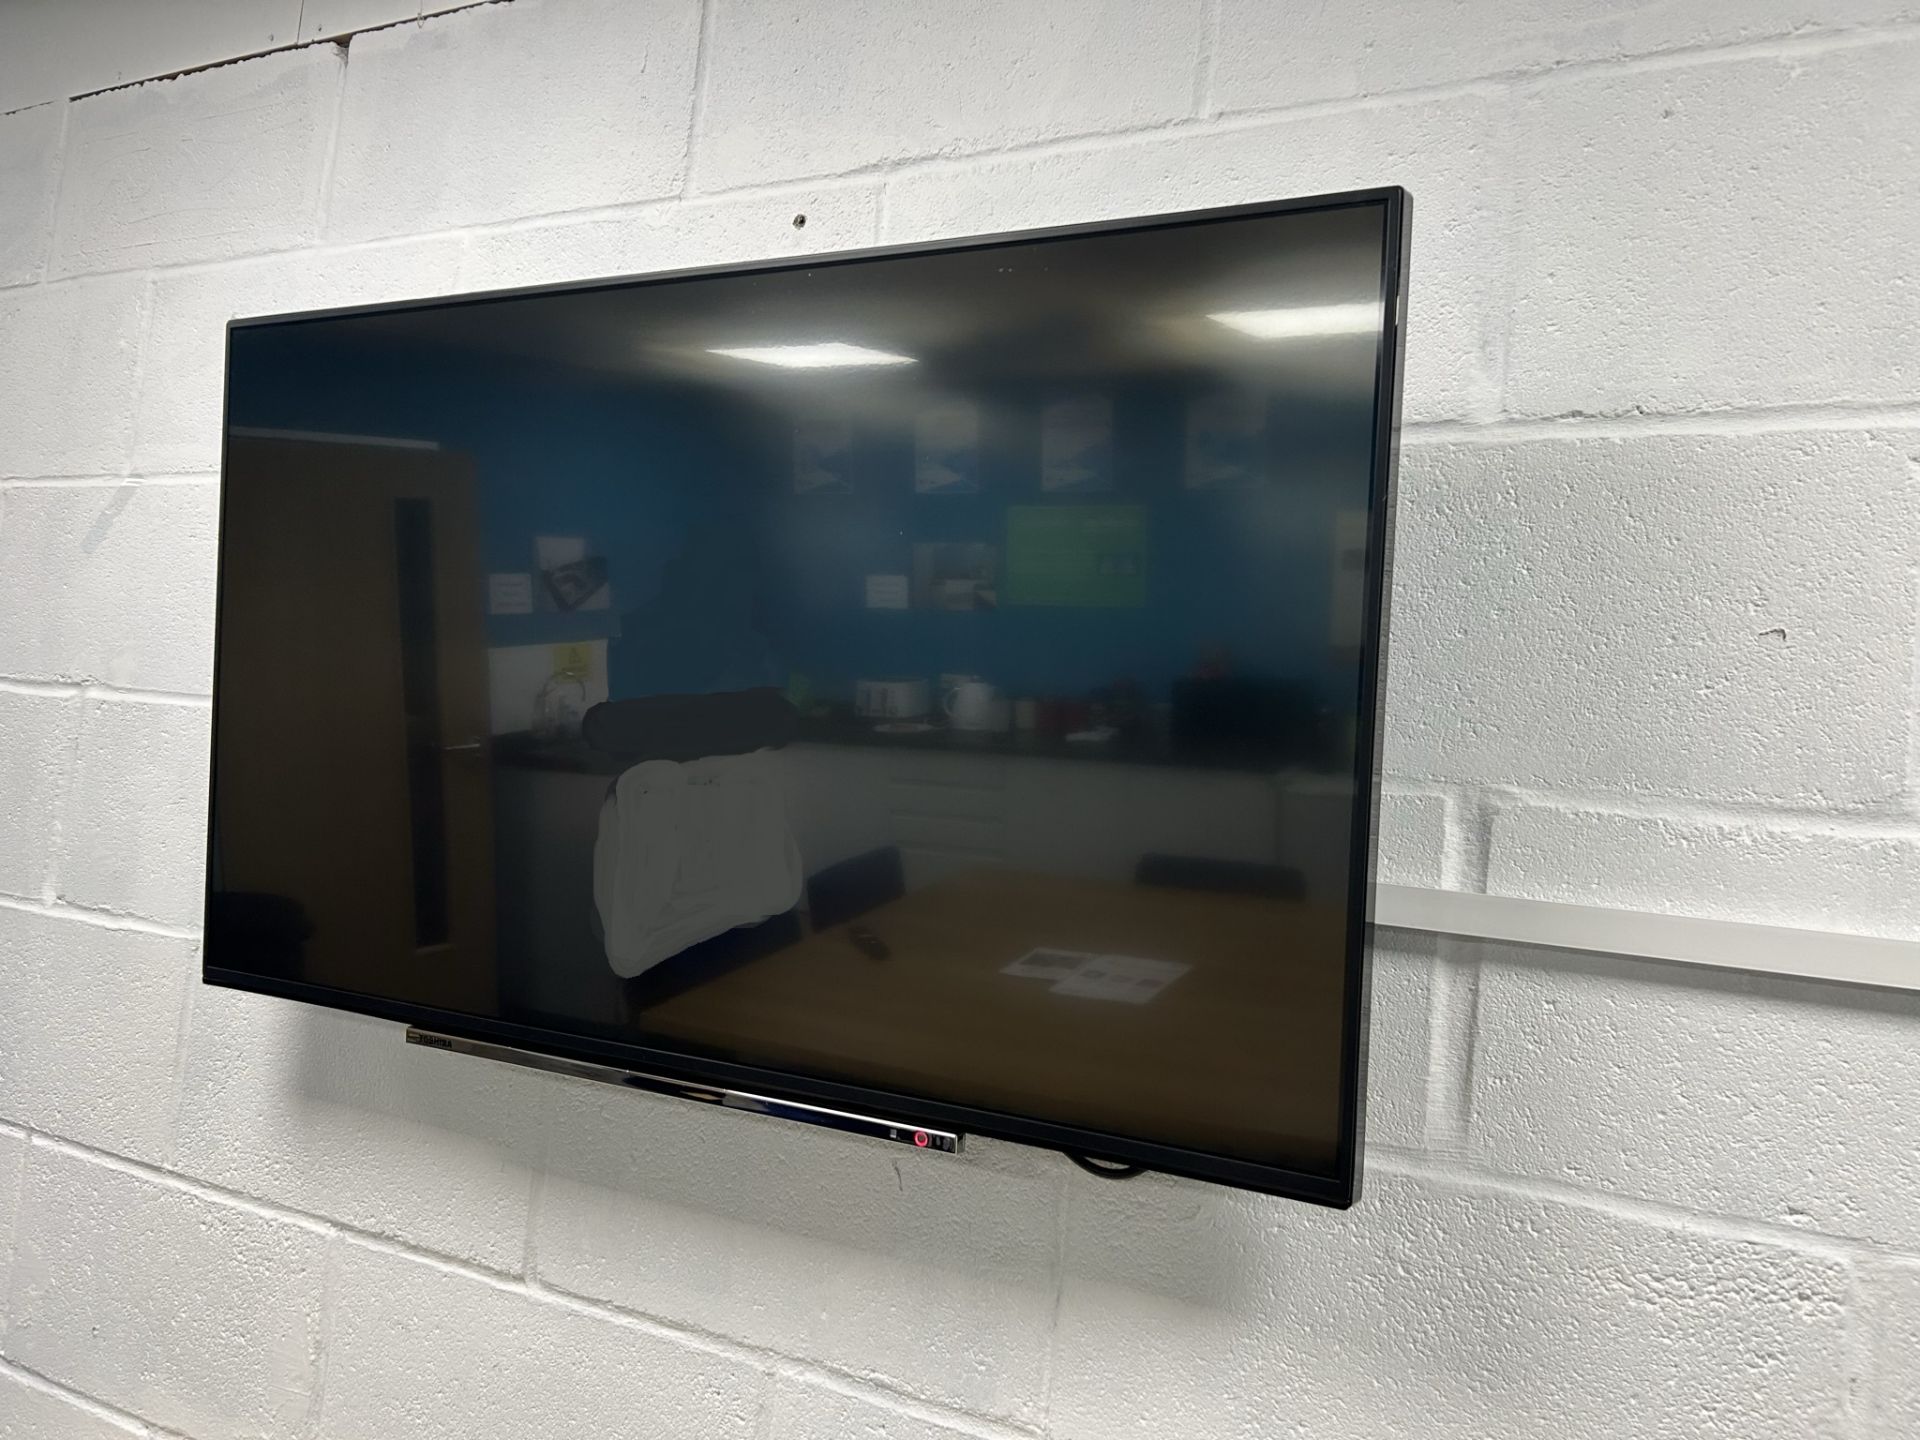 Toshiba 42" Wall Mounted Television - Image 2 of 2